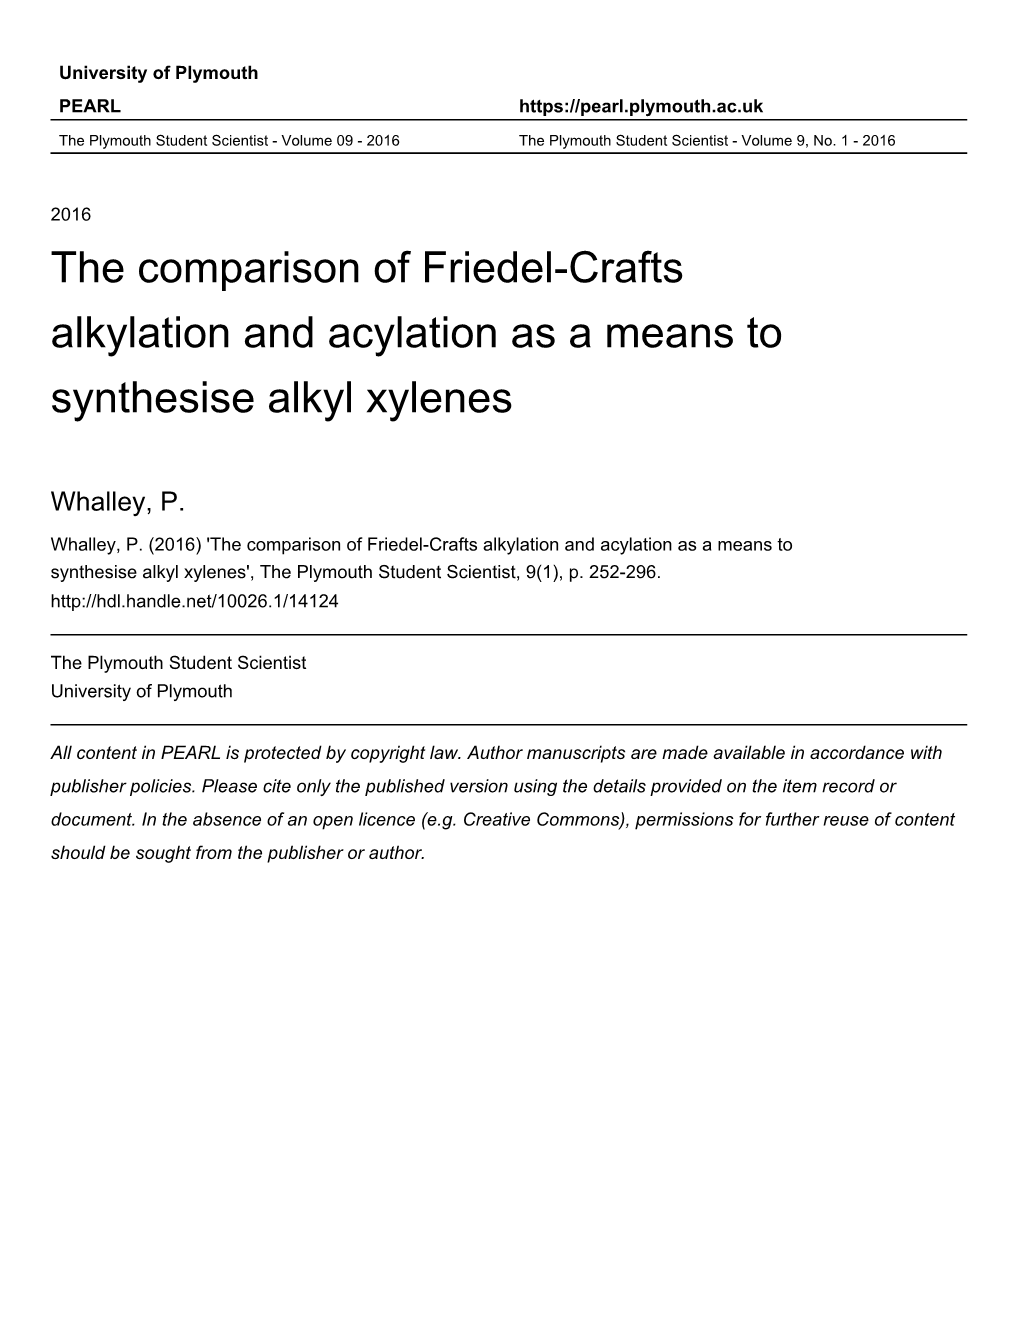 The Comparison of Friedel-Crafts Alkylation and Acylation As a Means to Synthesise Alkyl Xylenes